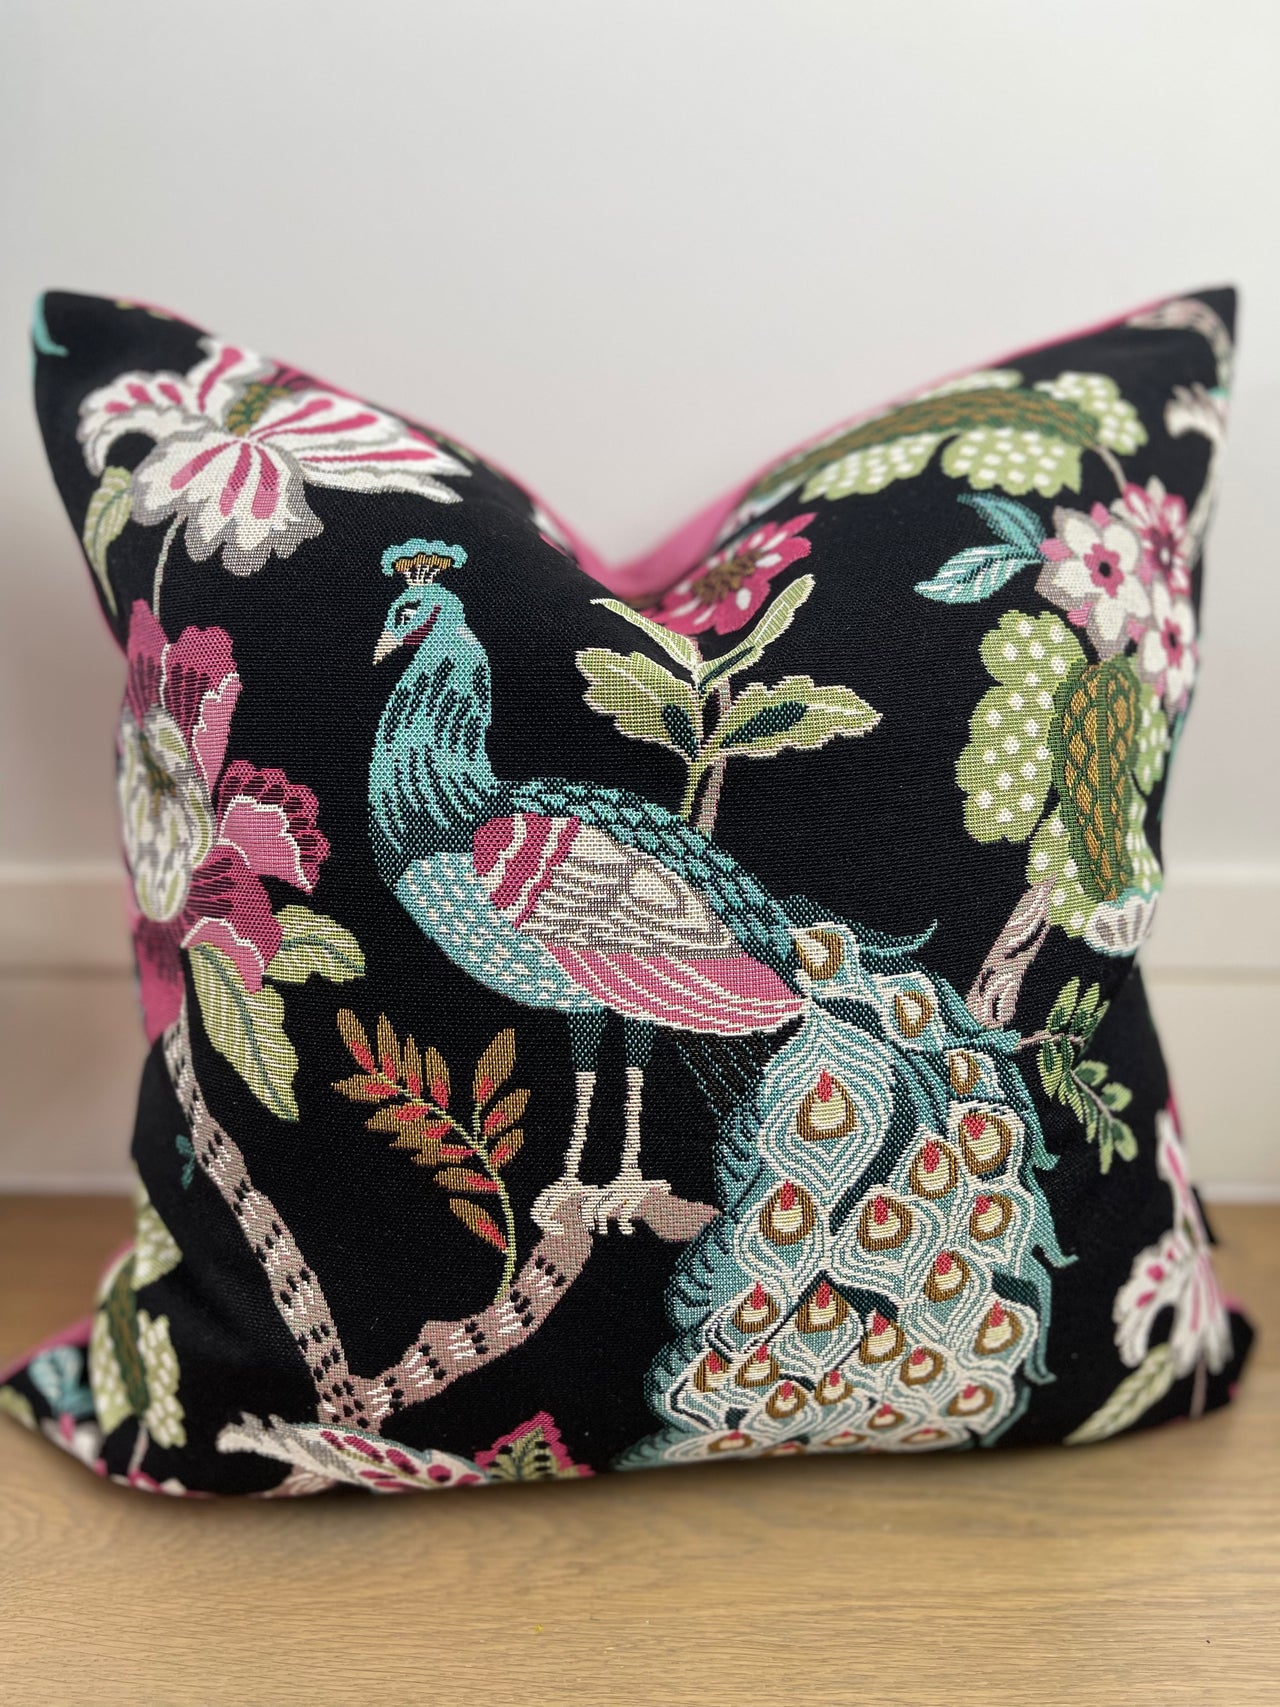 Majestic Peacock: Exquisite Woven Cushion Cover for Beauty and Elegance